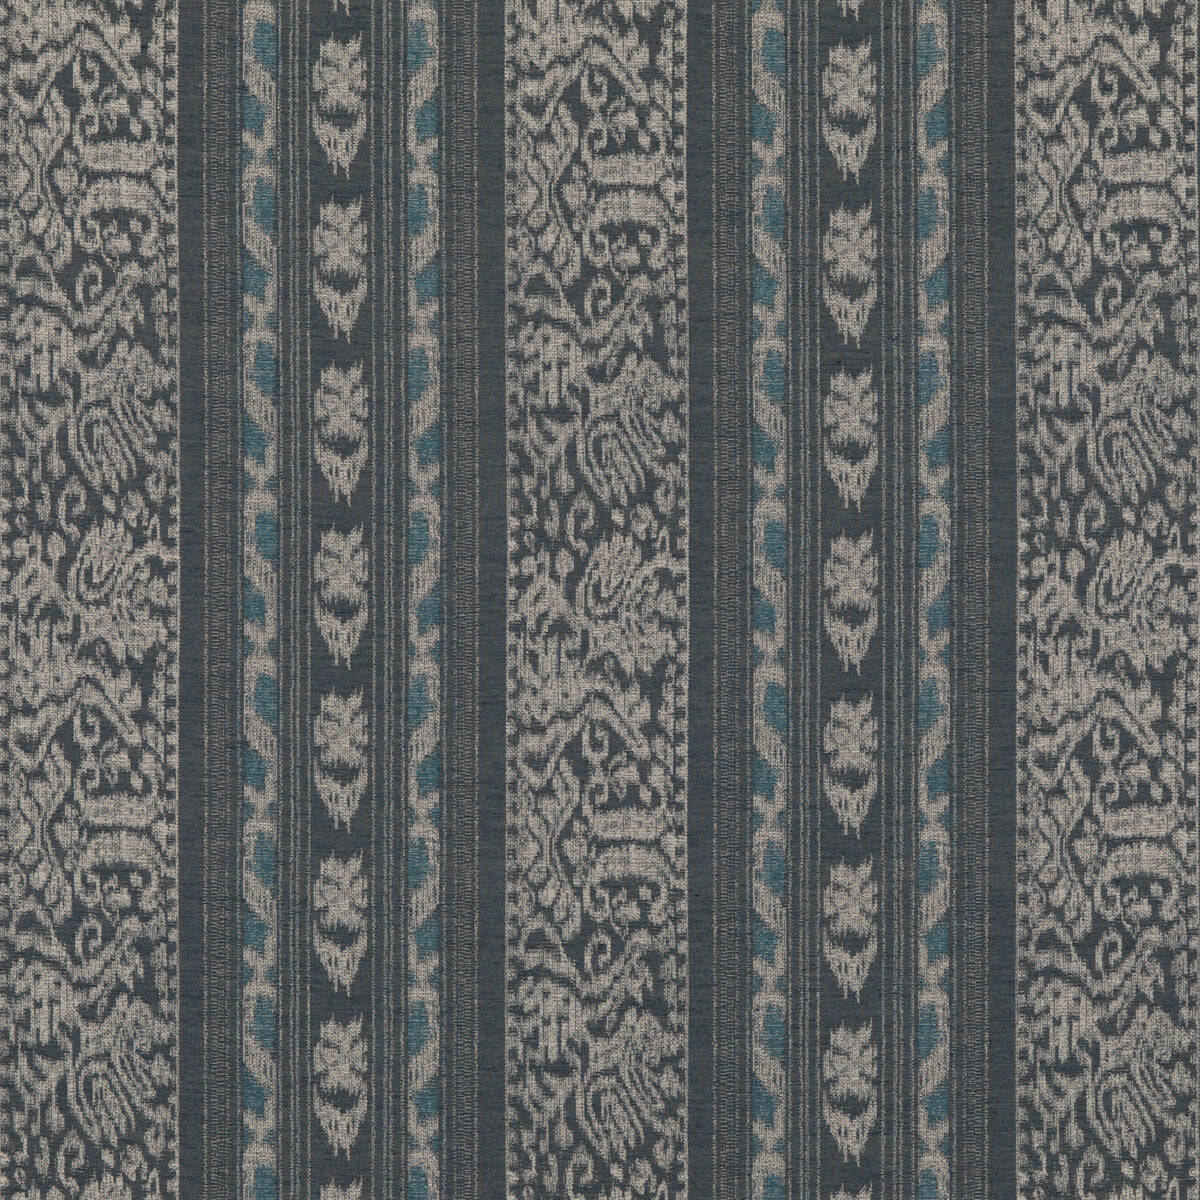 Senara fabric in indigo color - pattern BF10882.1.0 - by G P &amp; J Baker in the Chifu collection